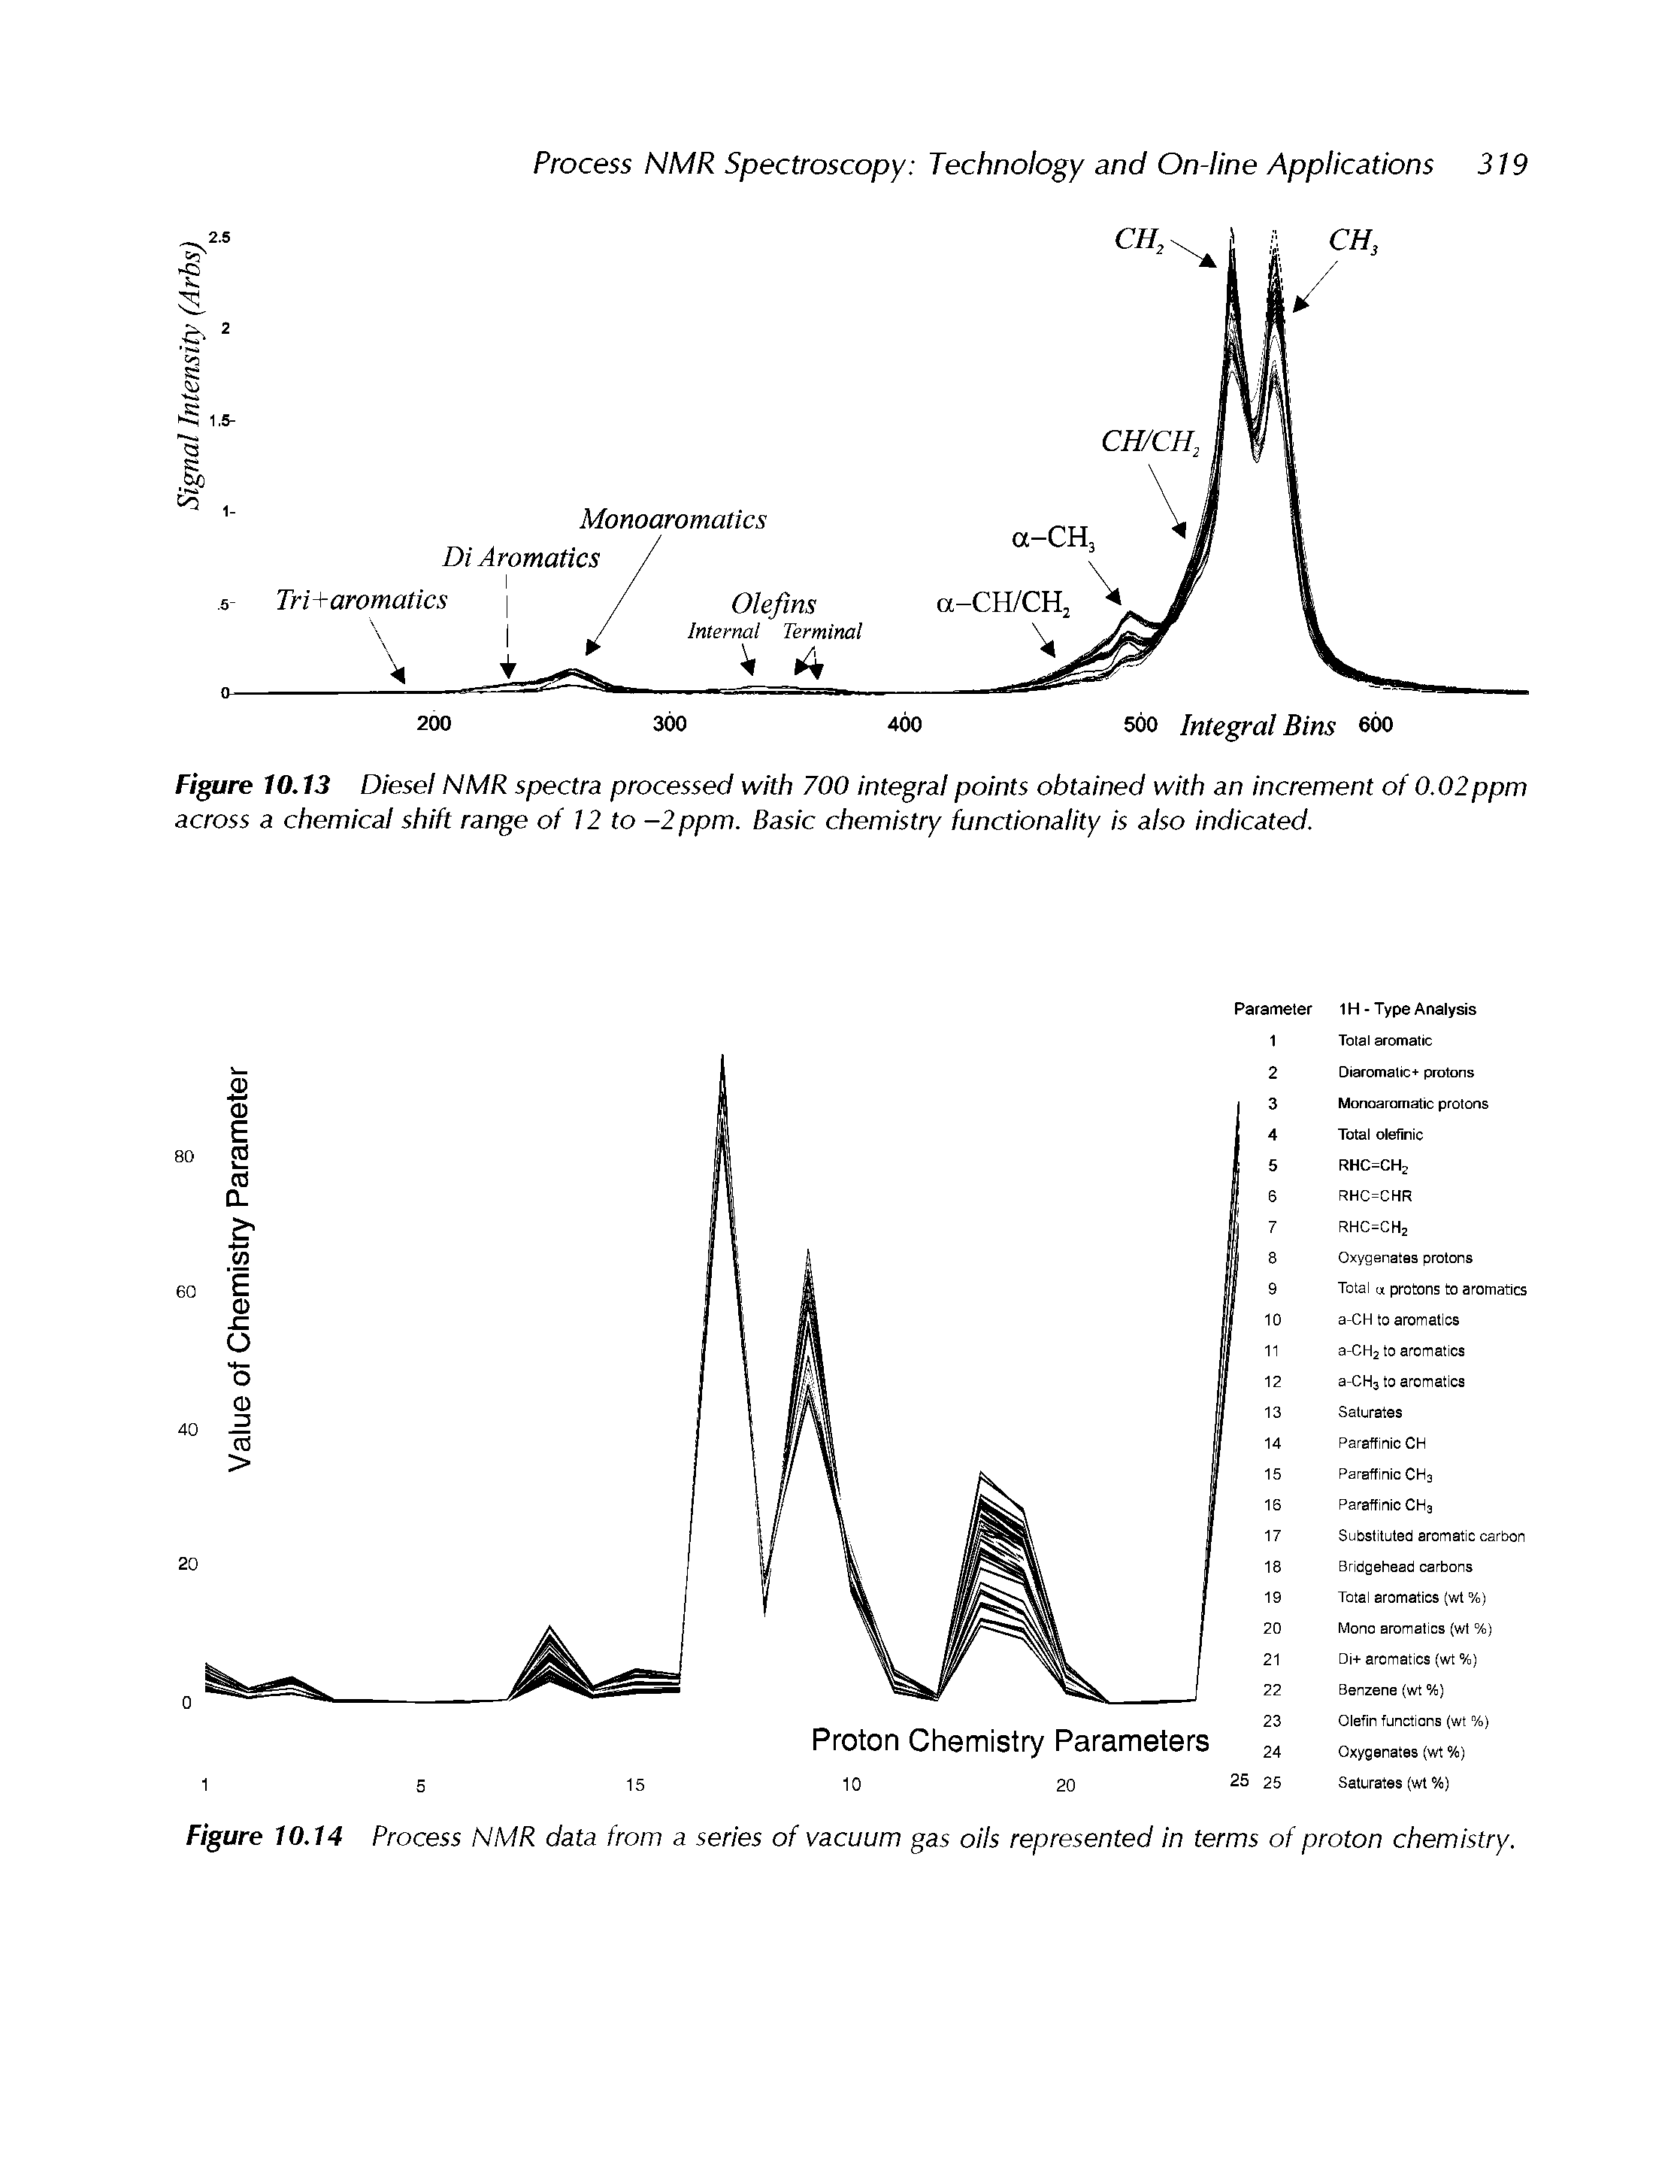 Figure 10.13 Diesel NMR spectra processed with 700 Integral points obtained with an increment of 0.02ppm across a chemical shift range of 12 to -2 ppm. Basic chemistry functionality is also indicated.